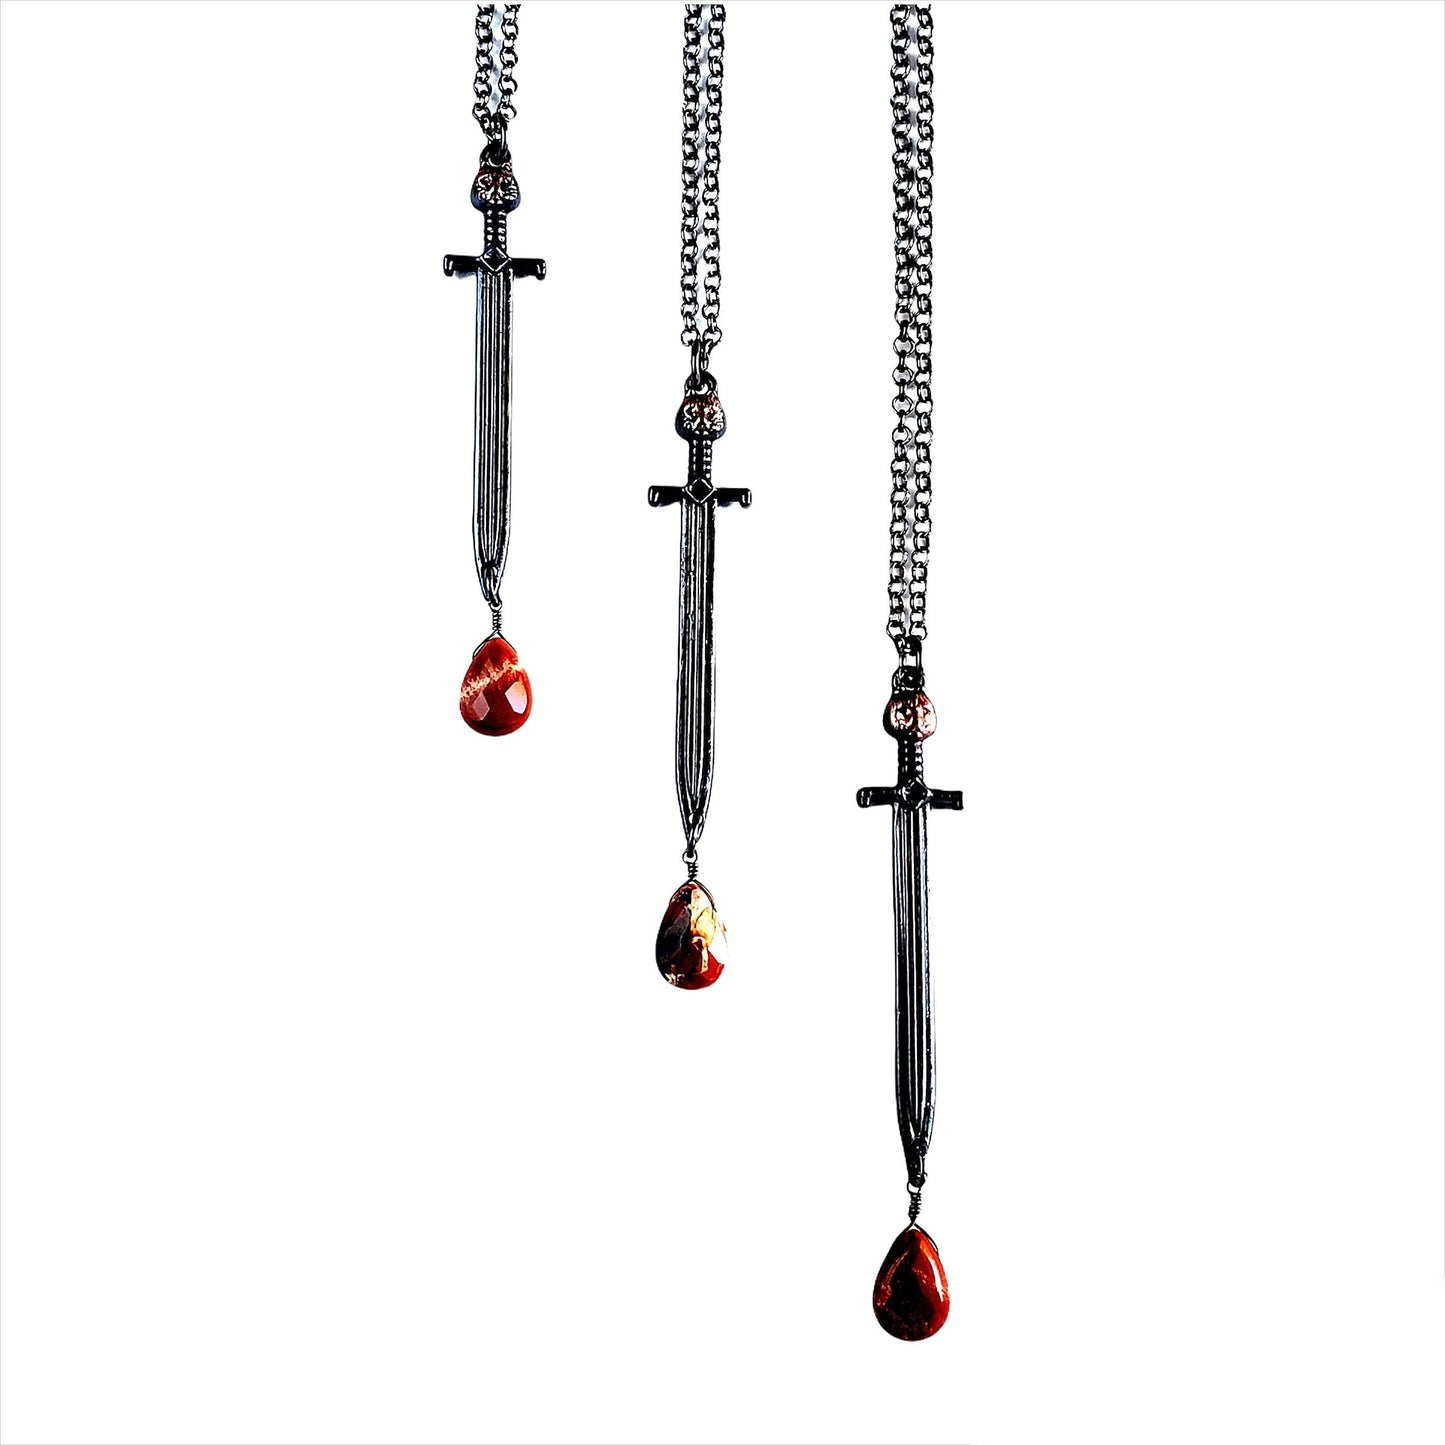 Doubled Edged Sword Necklace - Gunmetal